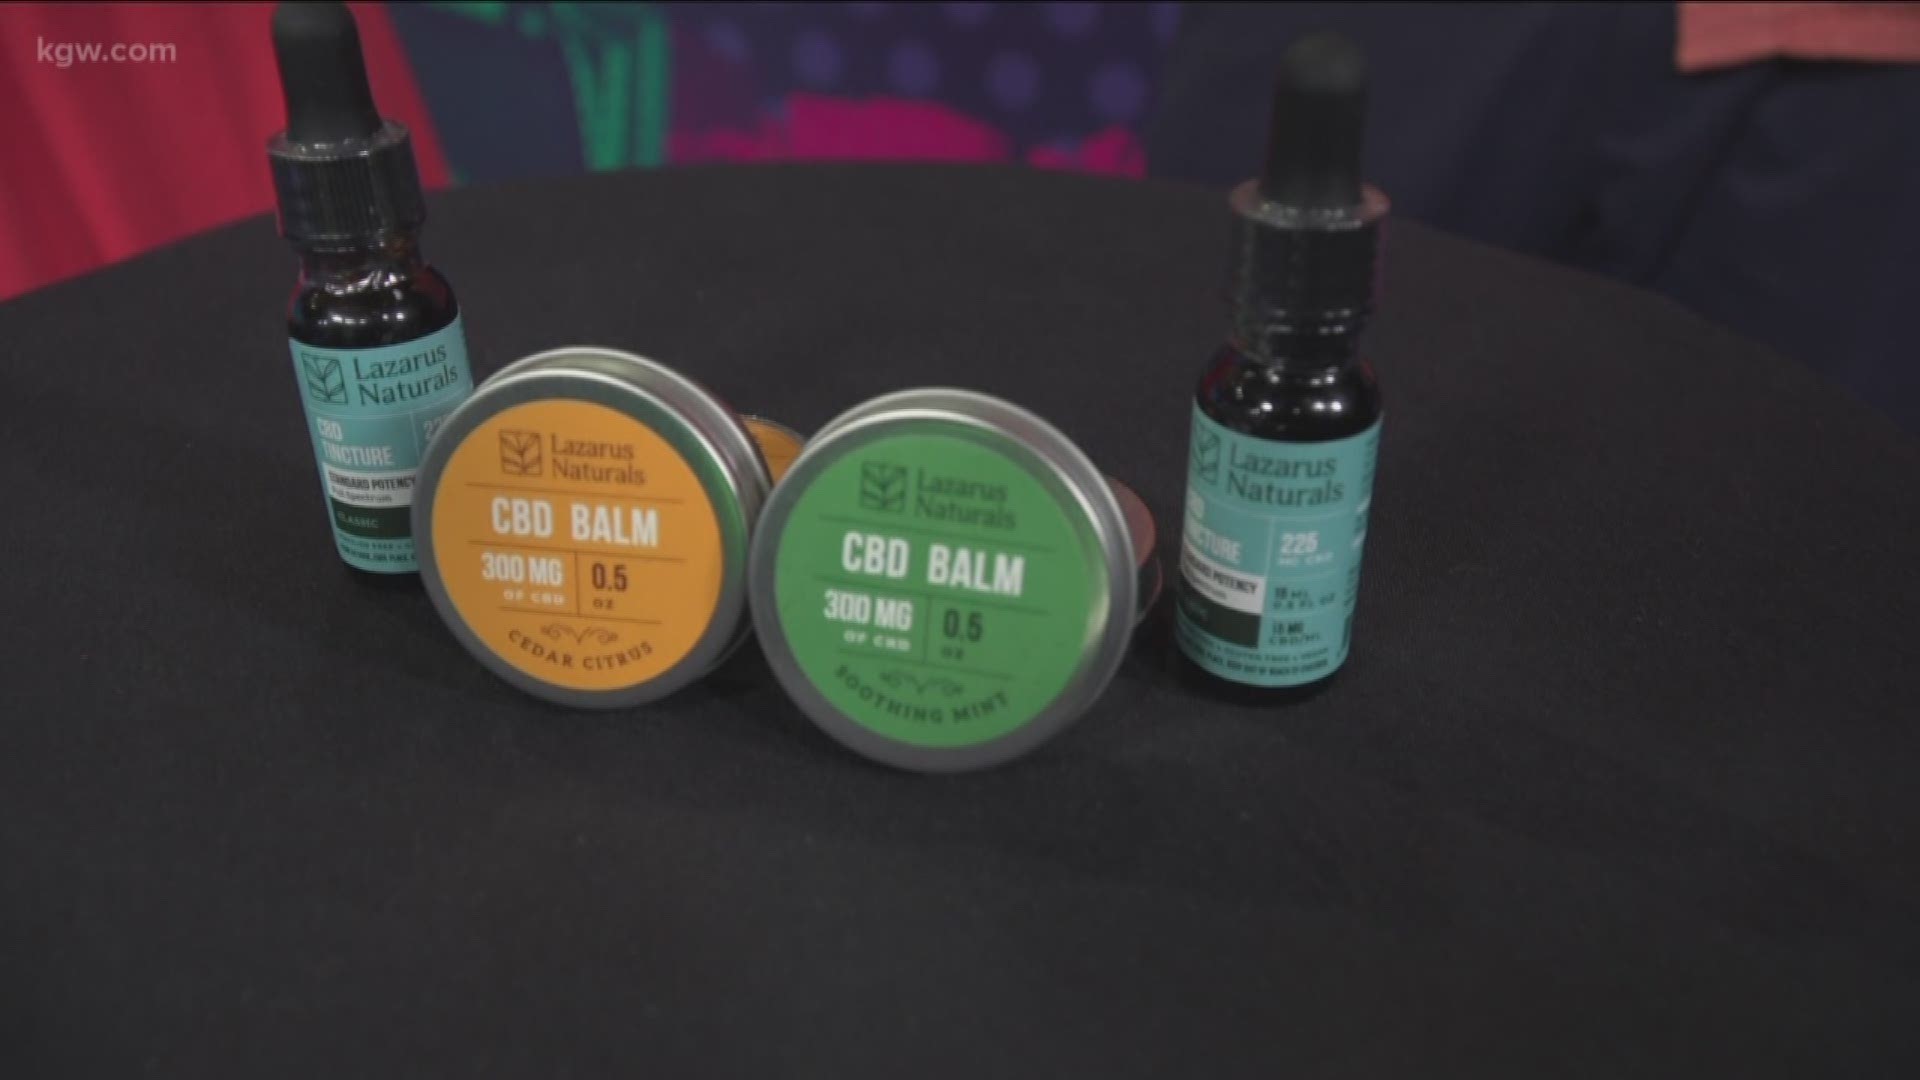 Lazarus Naturals is the first-ever official CBD sponsor of Hood to Coast. They'll be giving away massages and making cbd cocktails at the finish line.
lazarusnaturals.com
#TonightwithCassidy